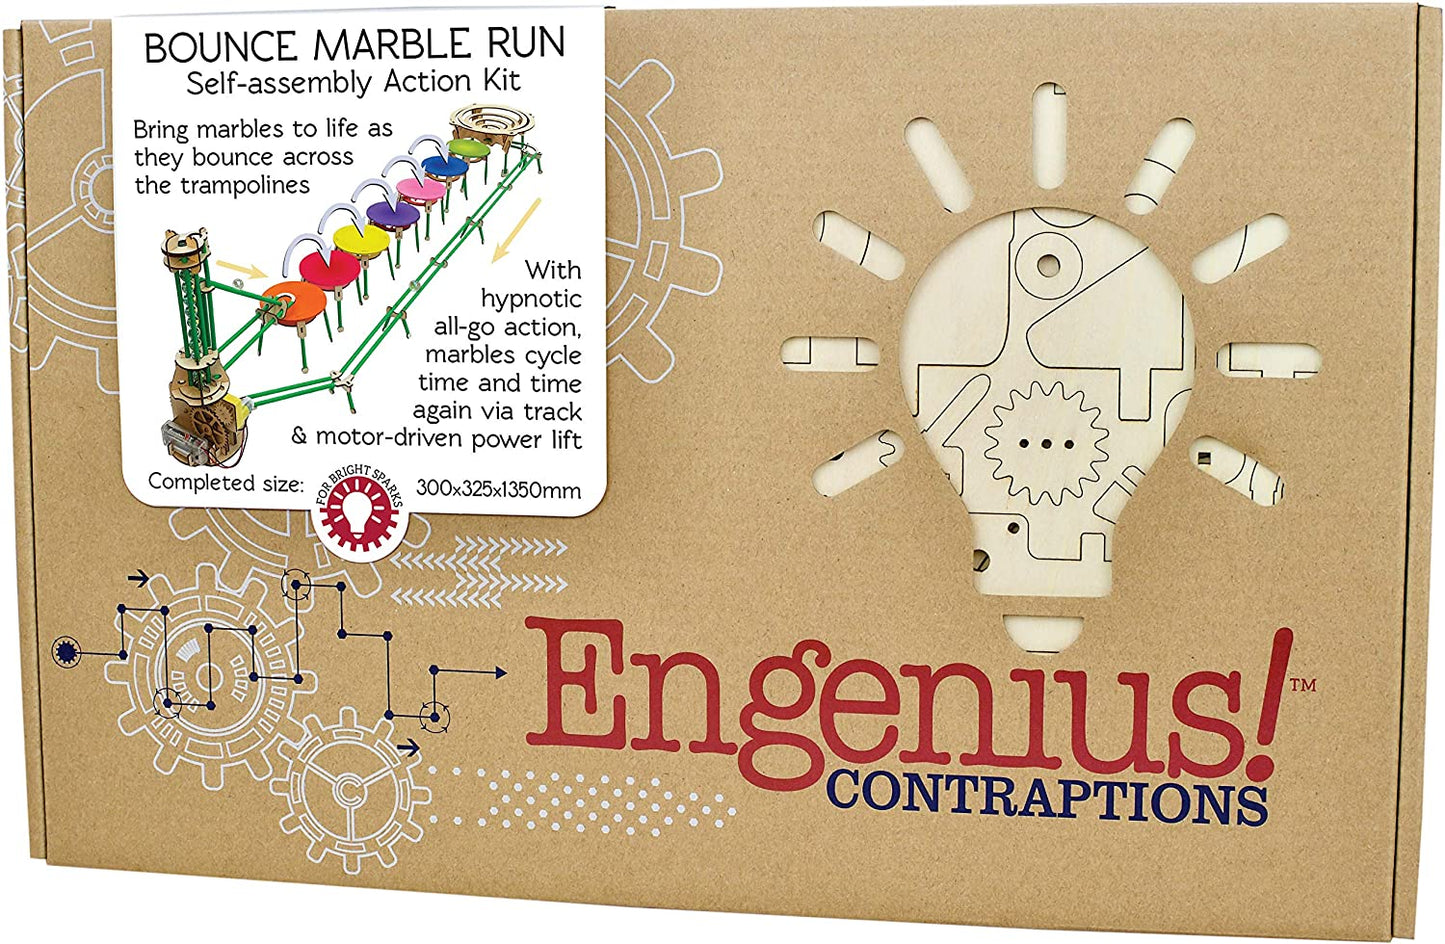 Engenius Contraptions Bounce Marble Run